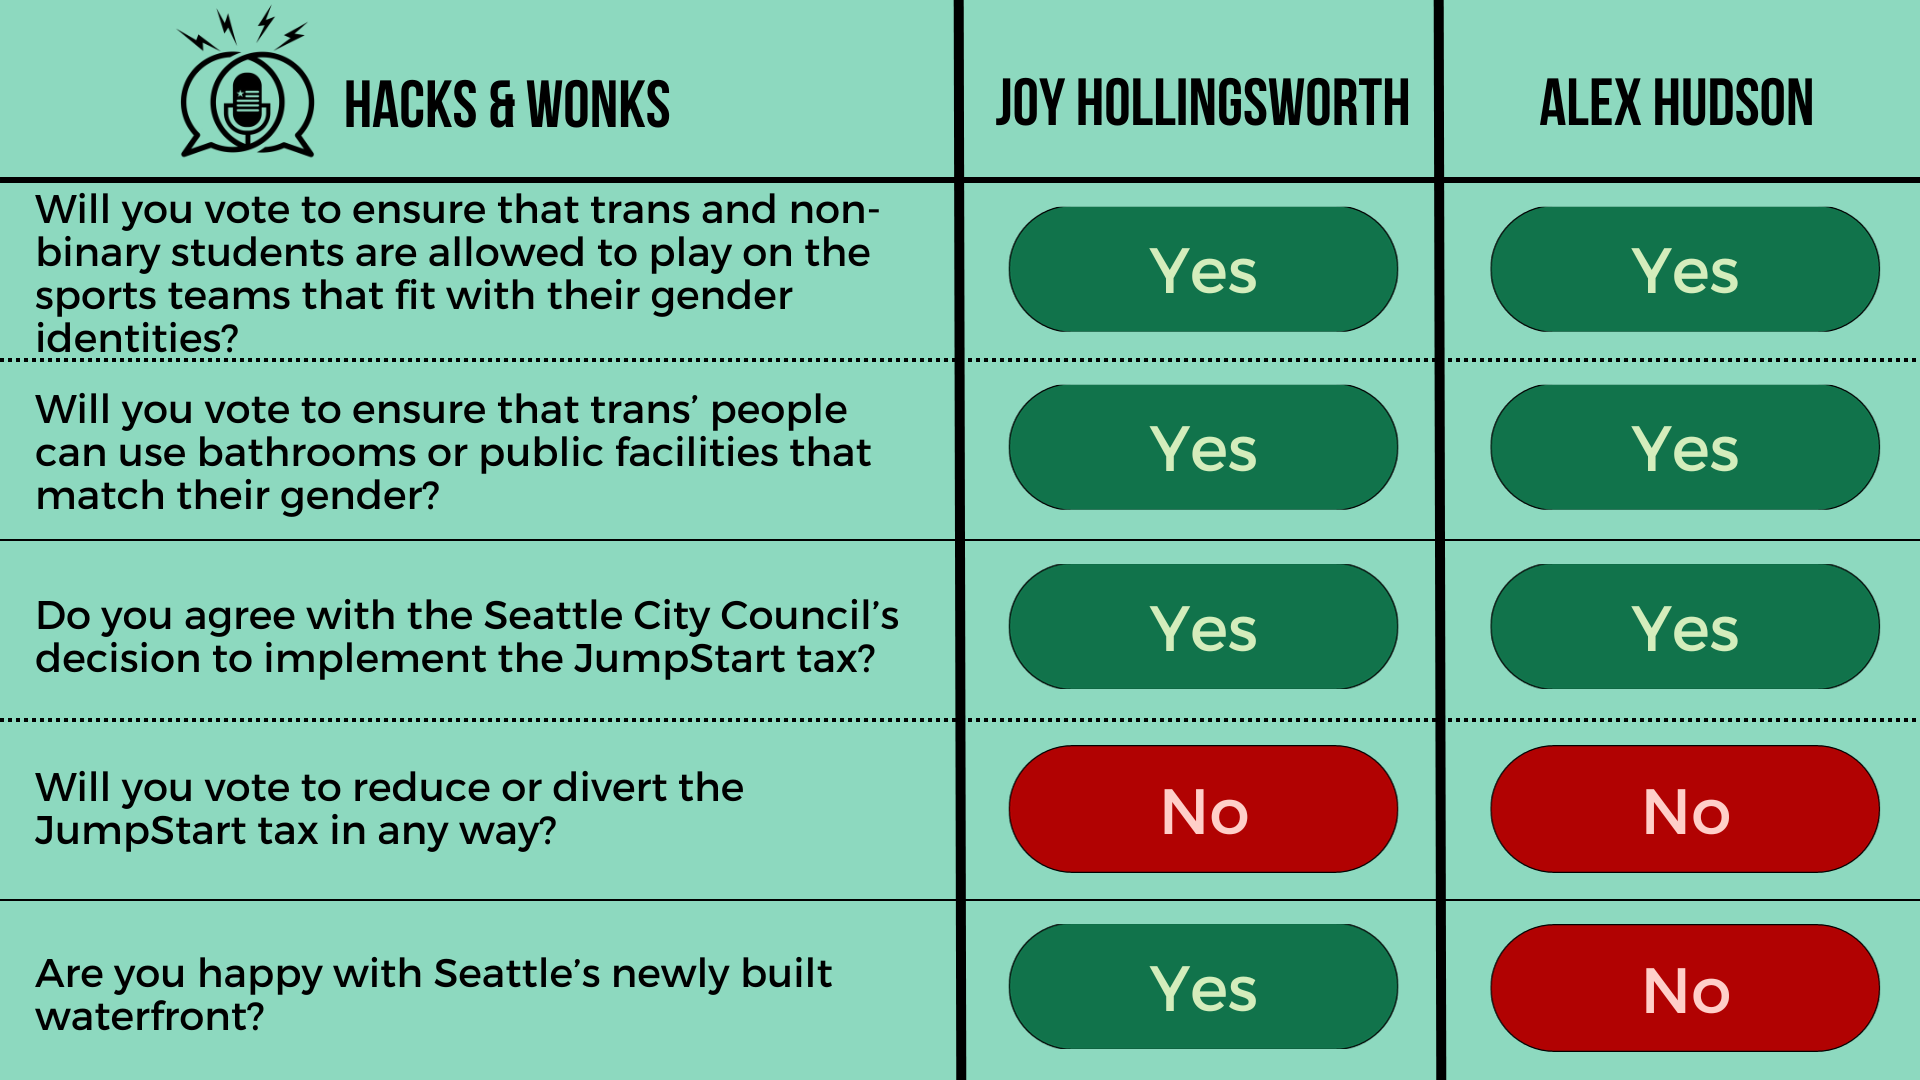 Q: Will you vote to ensure that trans and non-binary students are allowed to play on the sports teams that fit with their gender identities? Joy Hollingsworth: Yes, Alex Hudson: Yes  Q: Will you vote to ensure that trans’ people can use bathrooms or